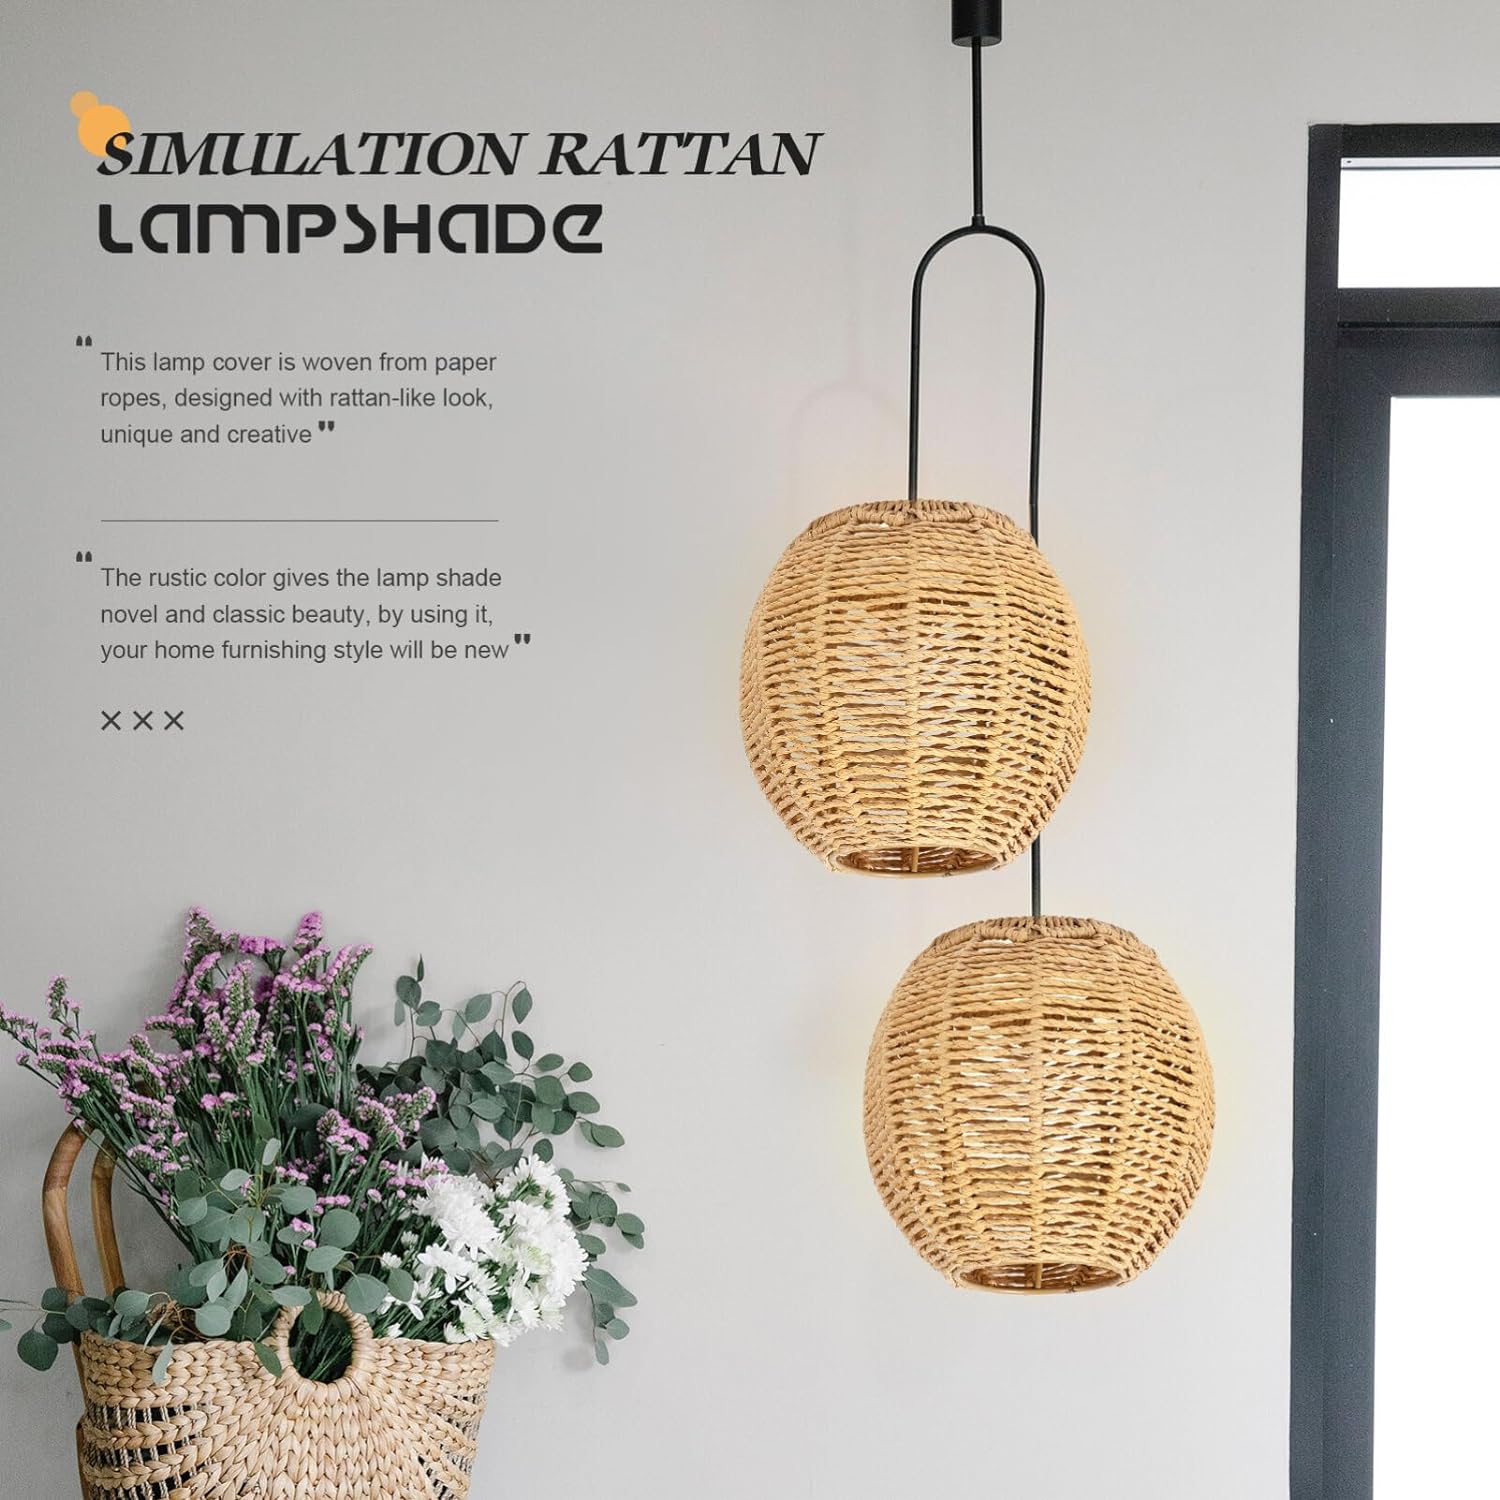 thinkstar 3Pc Retro Rattan Lamp Shade - Rustic Woven Small Lamp Shades - Lamp Shade Replacement For Pendant Light, Hanging Light, …